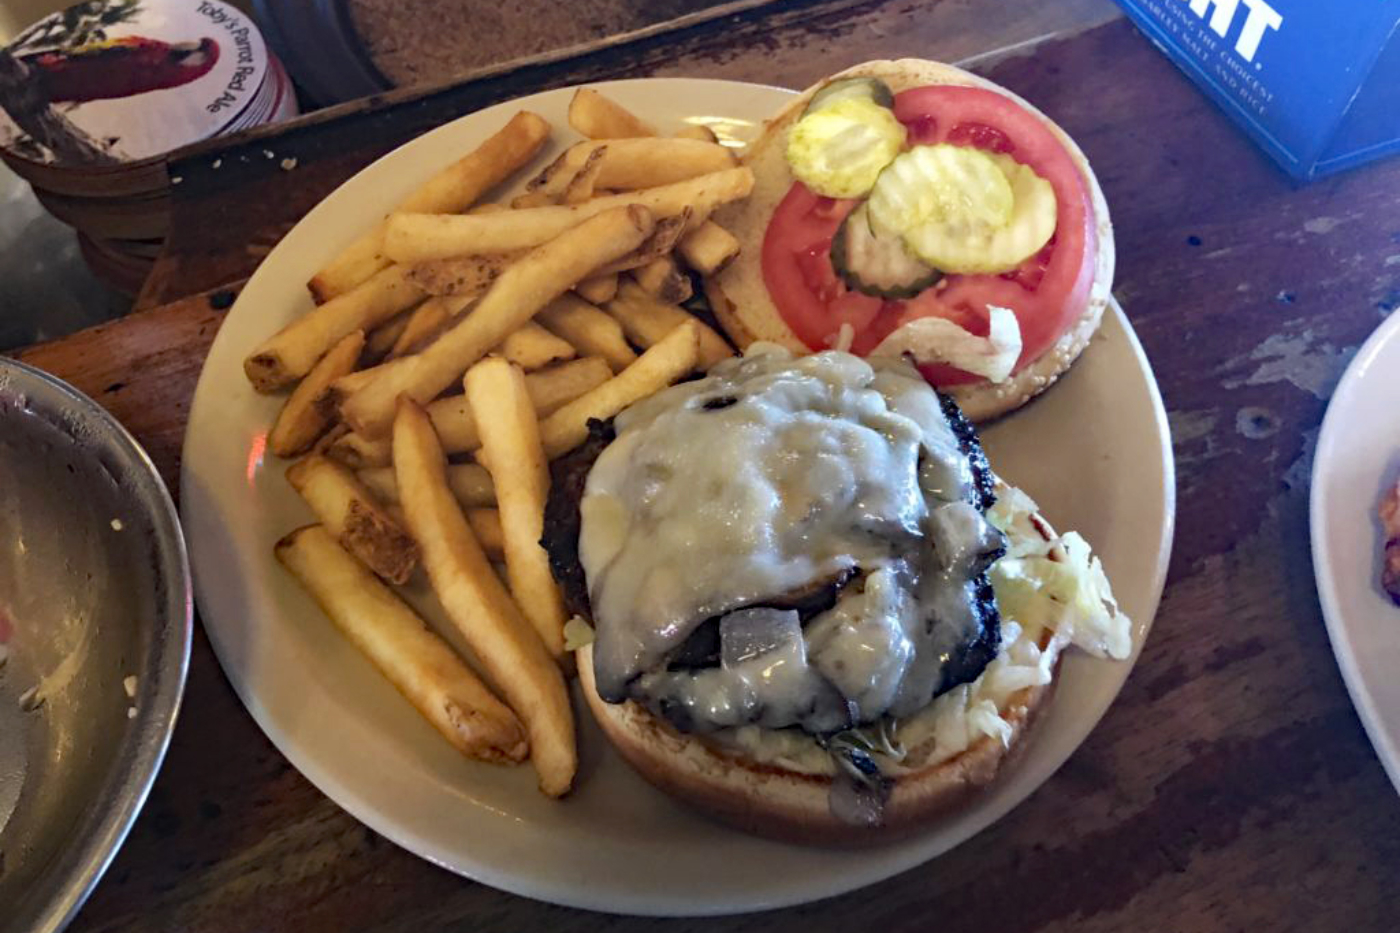 Some burger at Toby's Tavern in Coupeville, WA